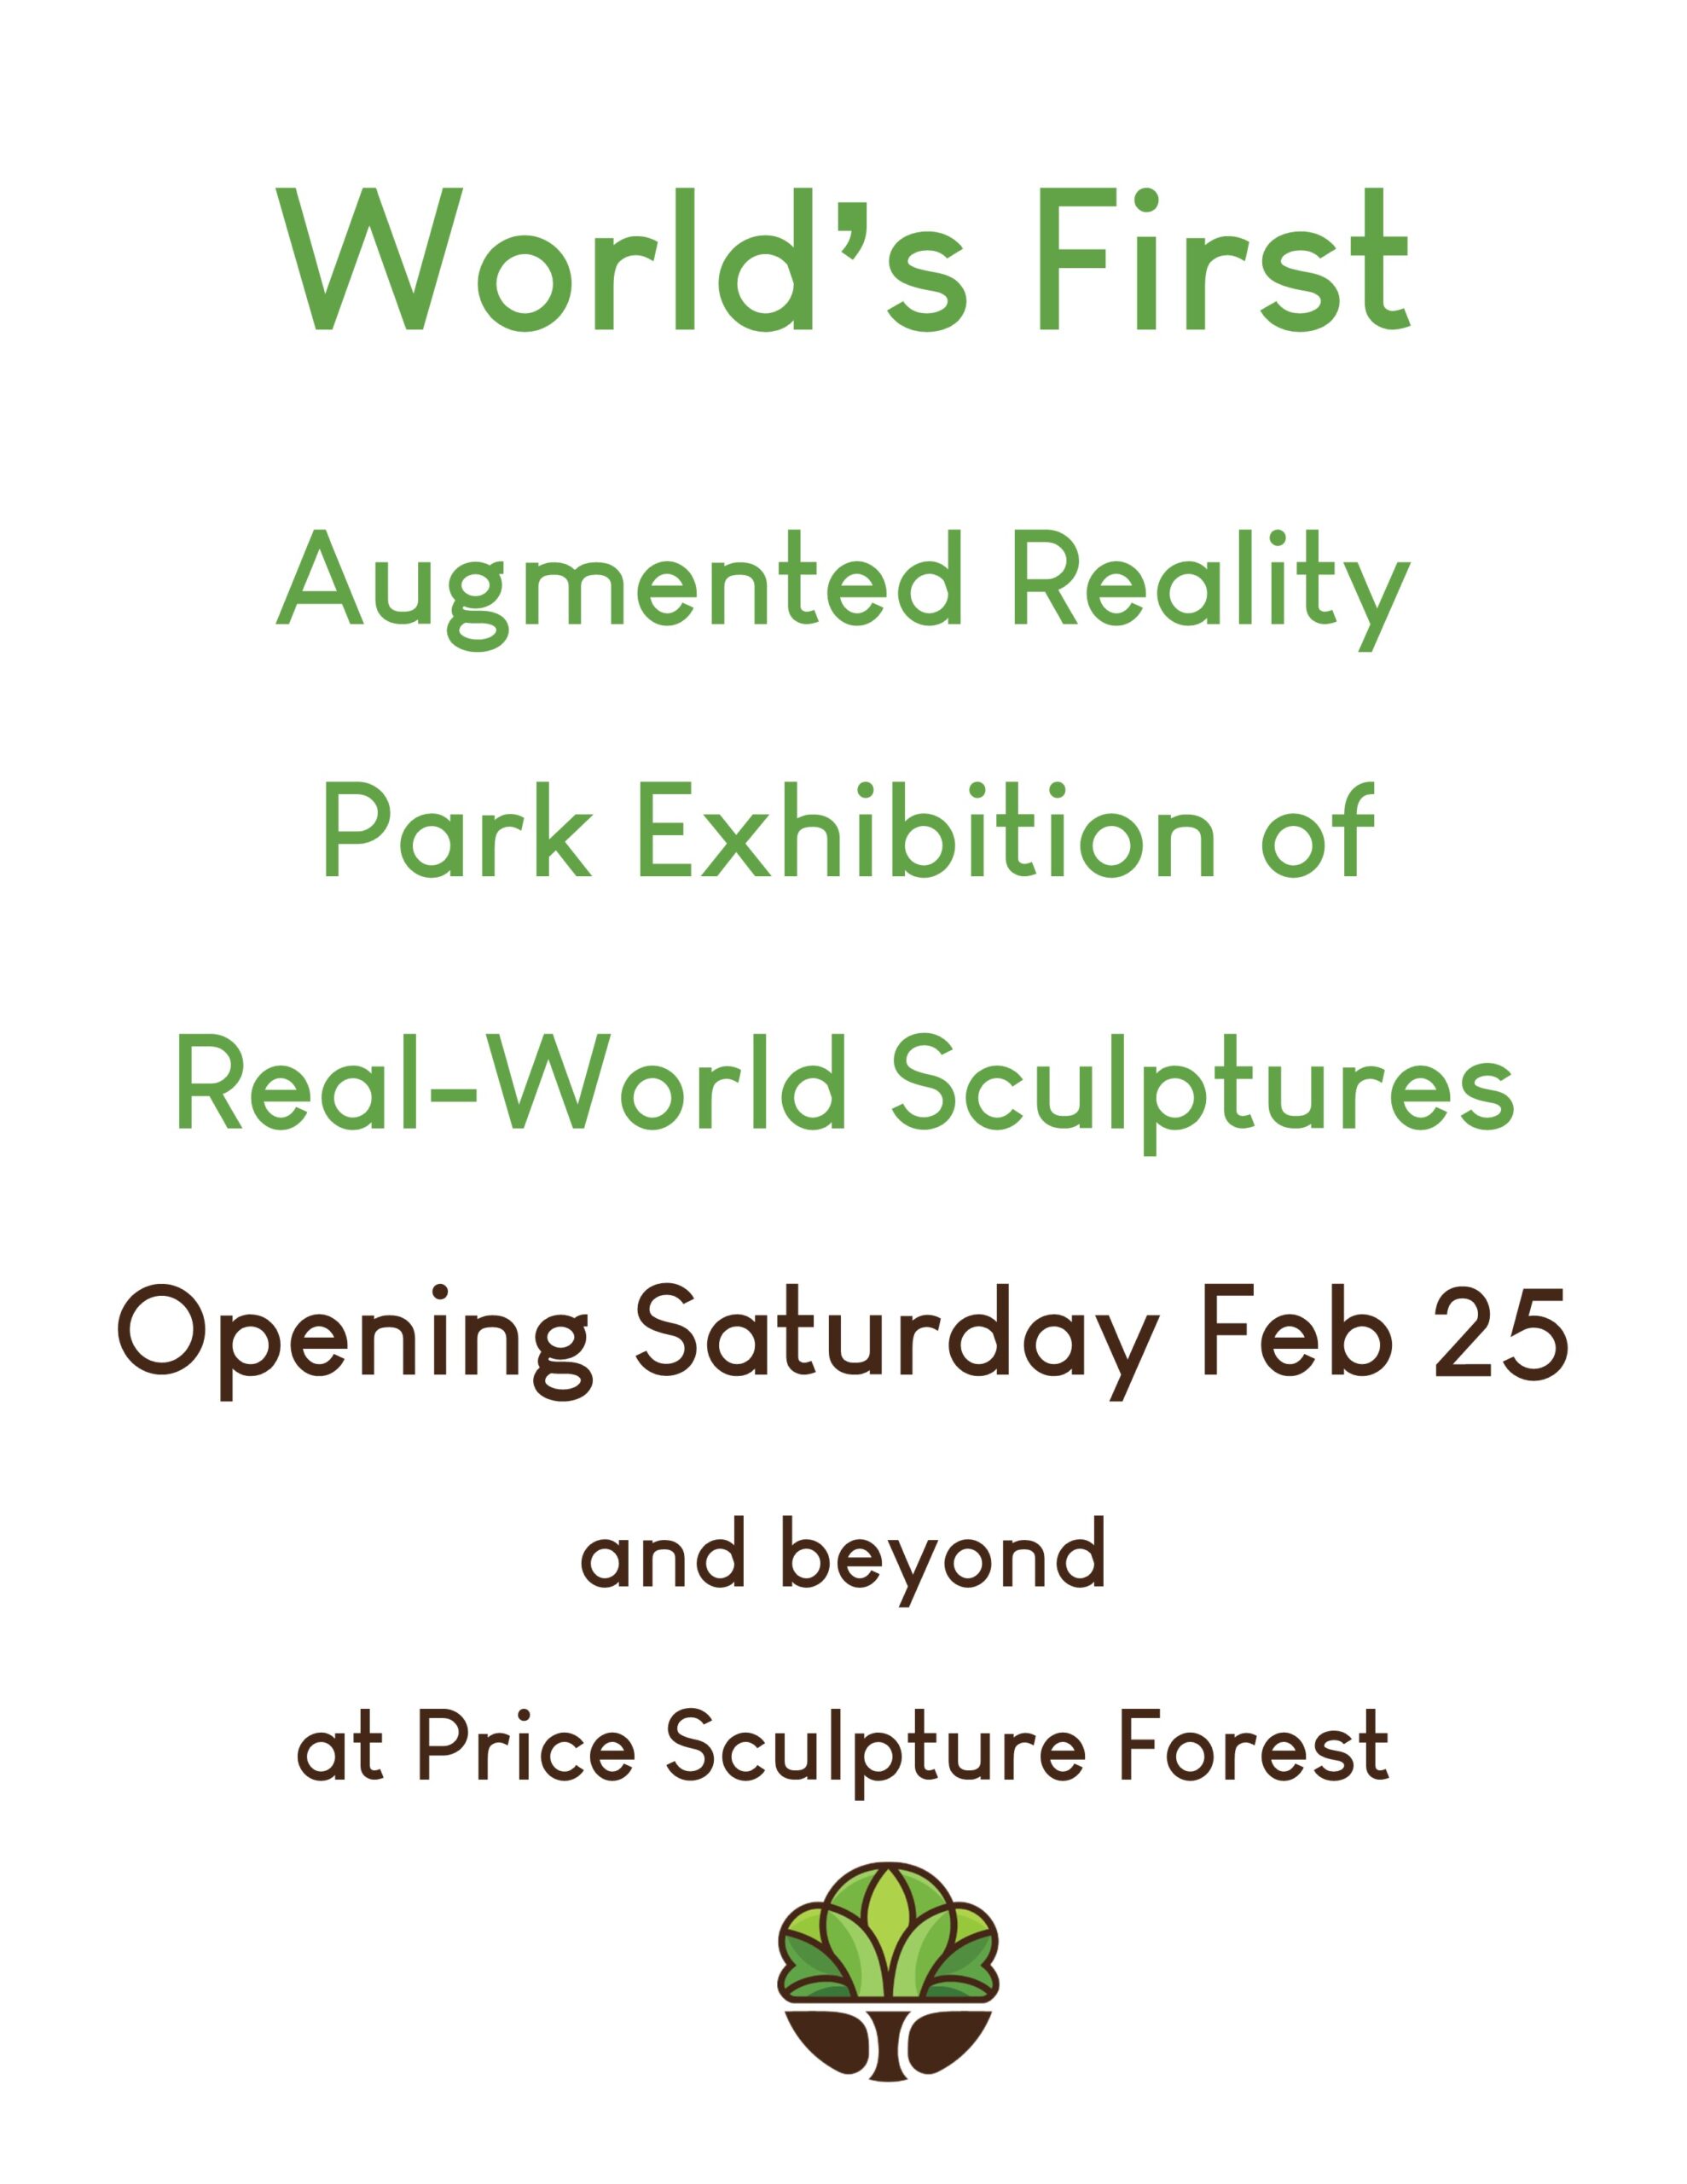 World's First Augmented Reality Exhibition of real-world sculptures at Price Sculpture Forest